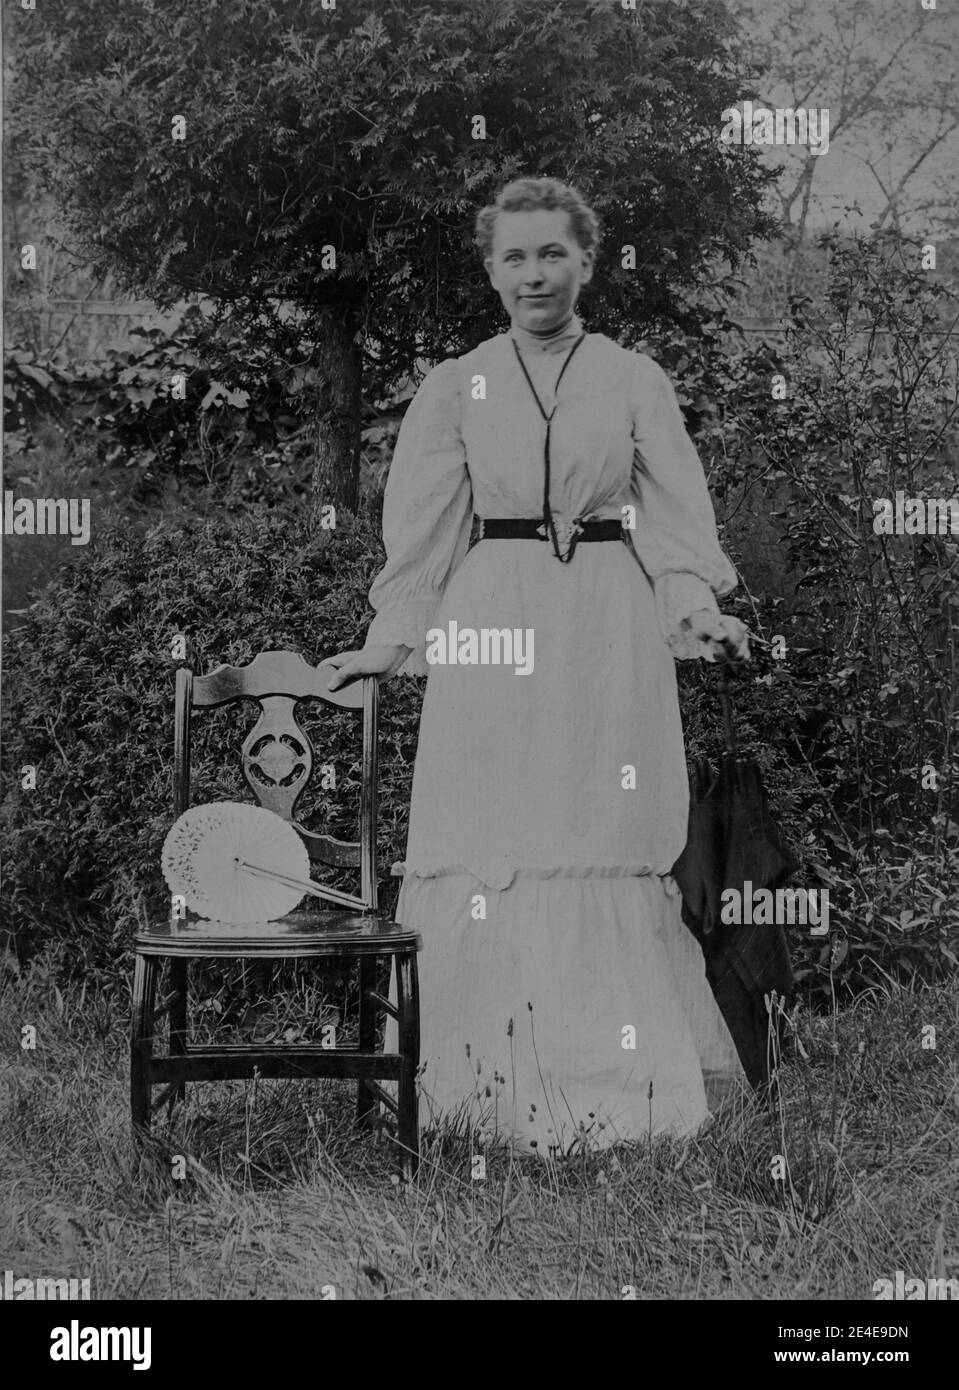 American archive monochrome portrait of a young woman or girl standing next to a chair in a garden with a fan on the chair. The girl is wearing a long white dress and is holding an umbrella. Taken in the late 19th century in Port Byron, NY, USA Stock Photo